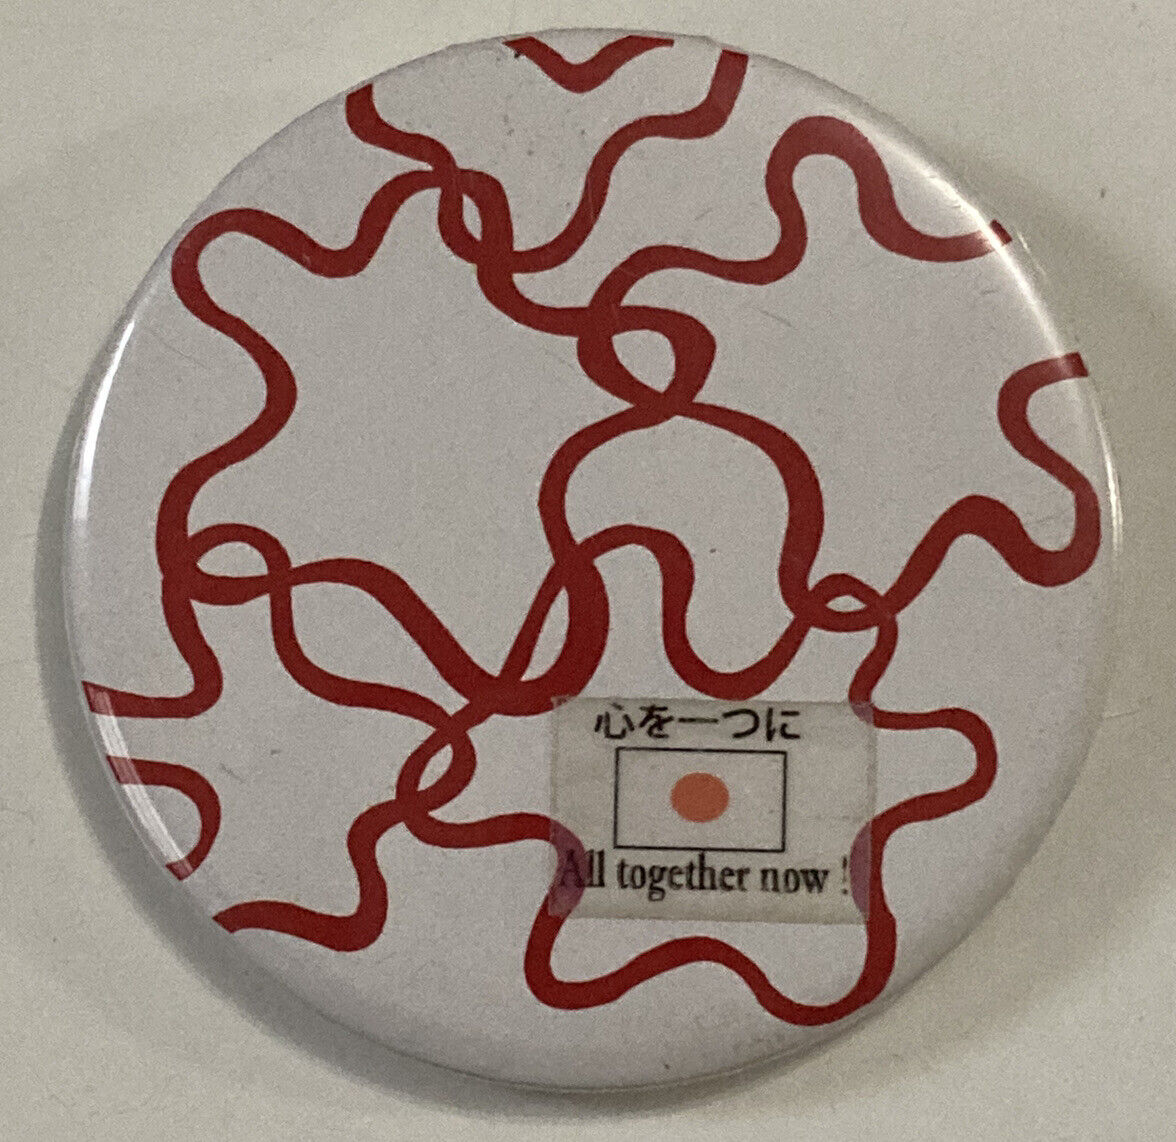 Toyo Ito Japanese Architect “all together now” 2 1/8” Pinback Button